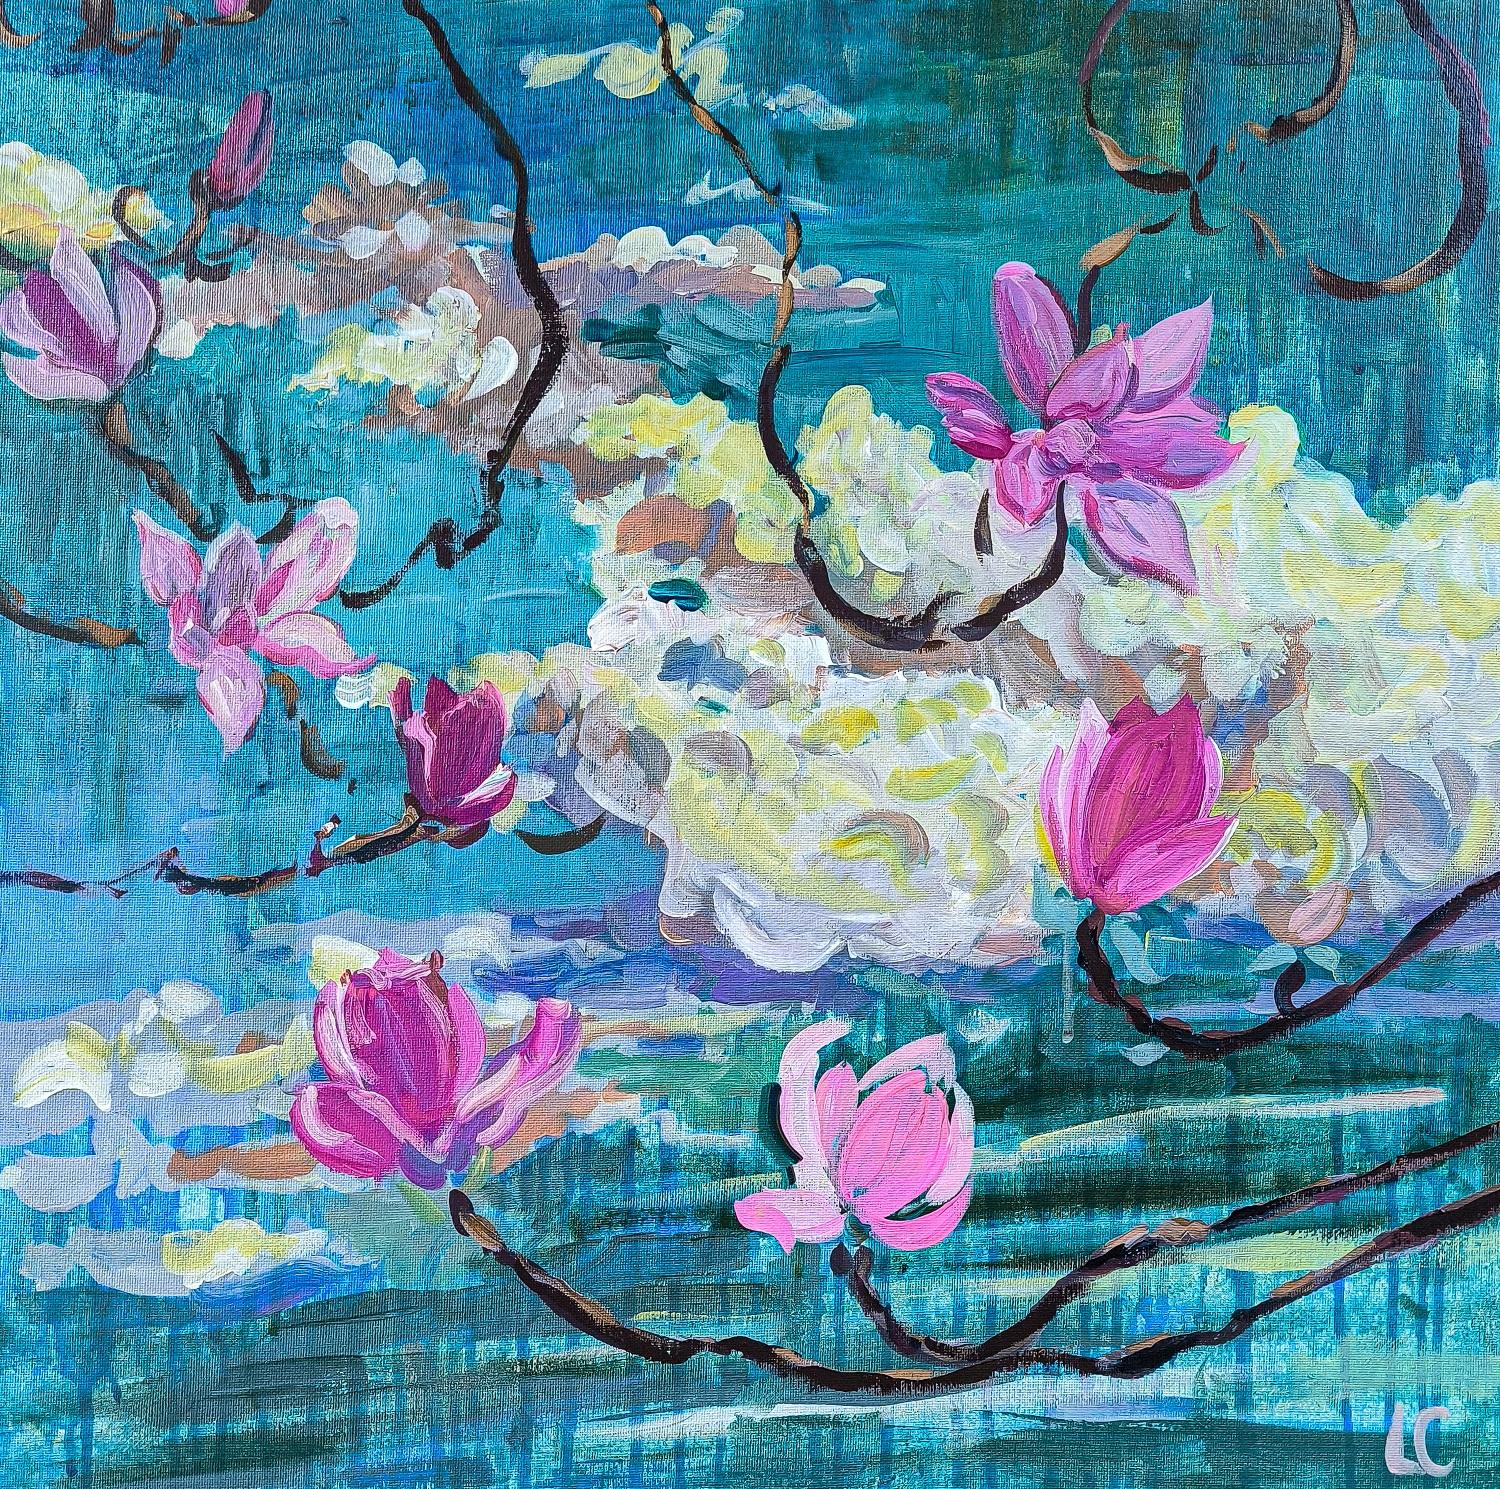 Magnolia Forever I & Iris bloom too - Fauvist Painting by  Linda Clerget